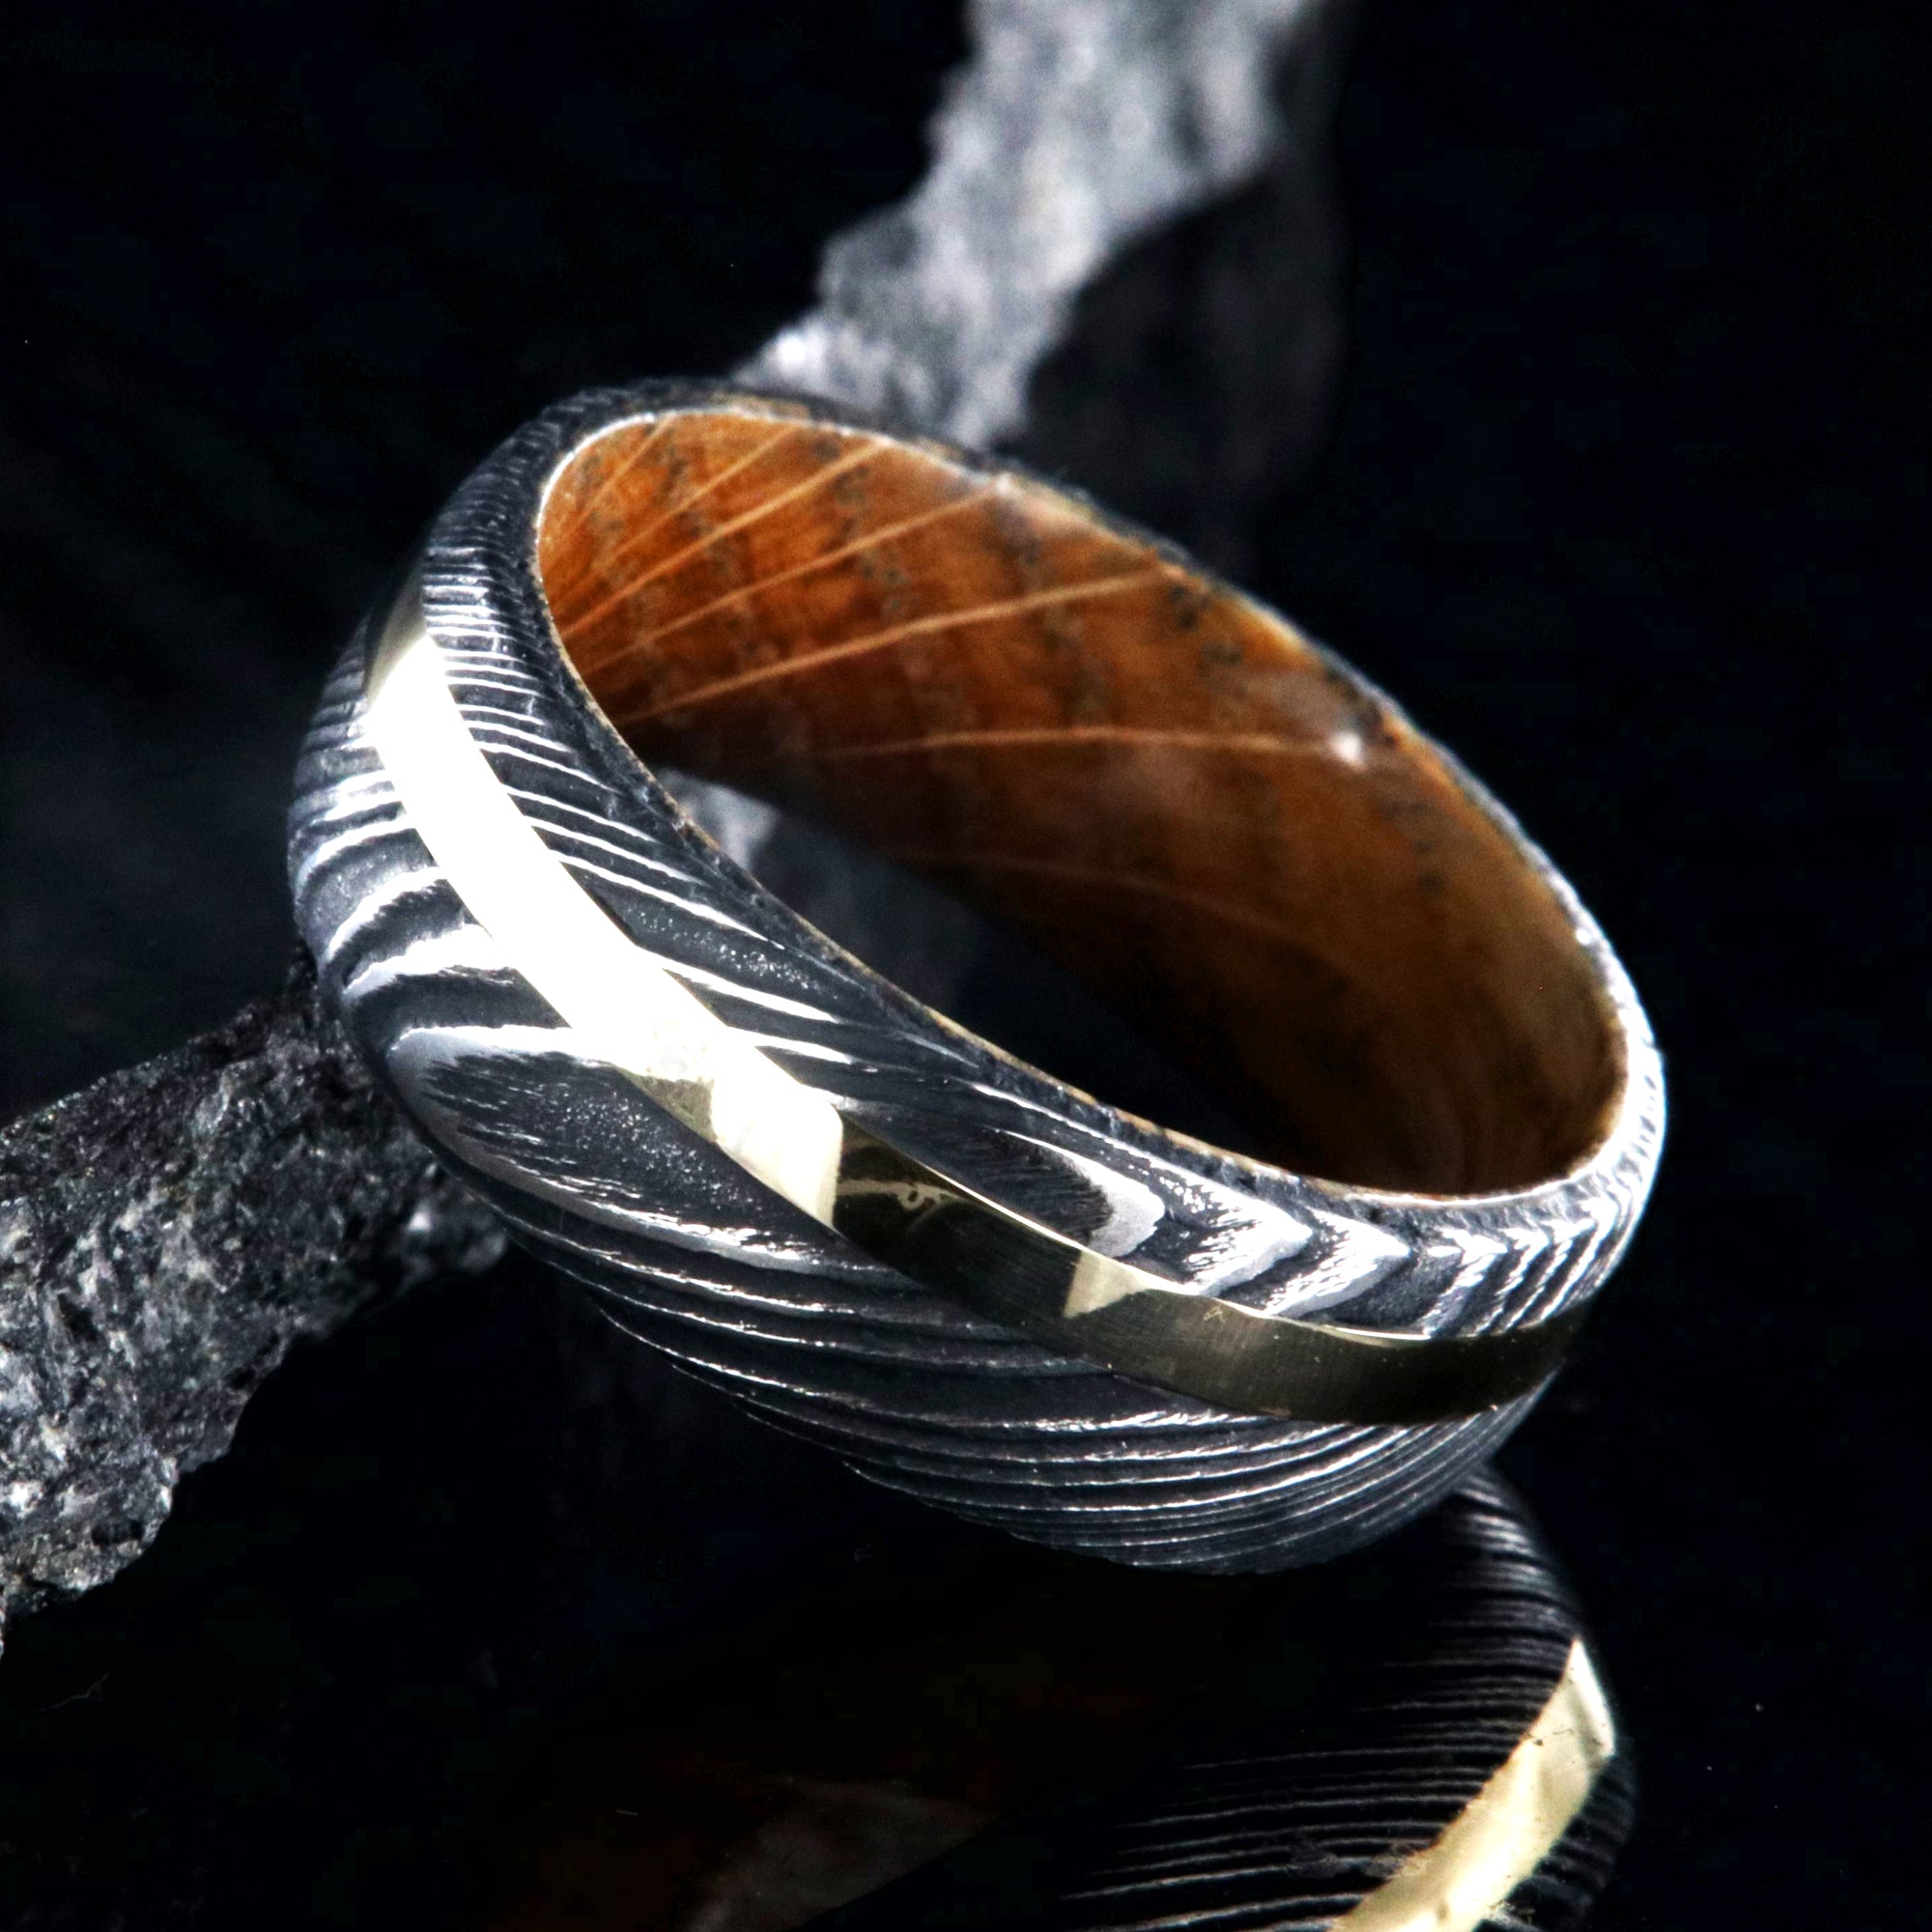 8mm wide black Damascus steel wedding ring with rounded profile, 2mm wide yellow gold inlay and a Jack Daniel's whiskey barrel sleeve